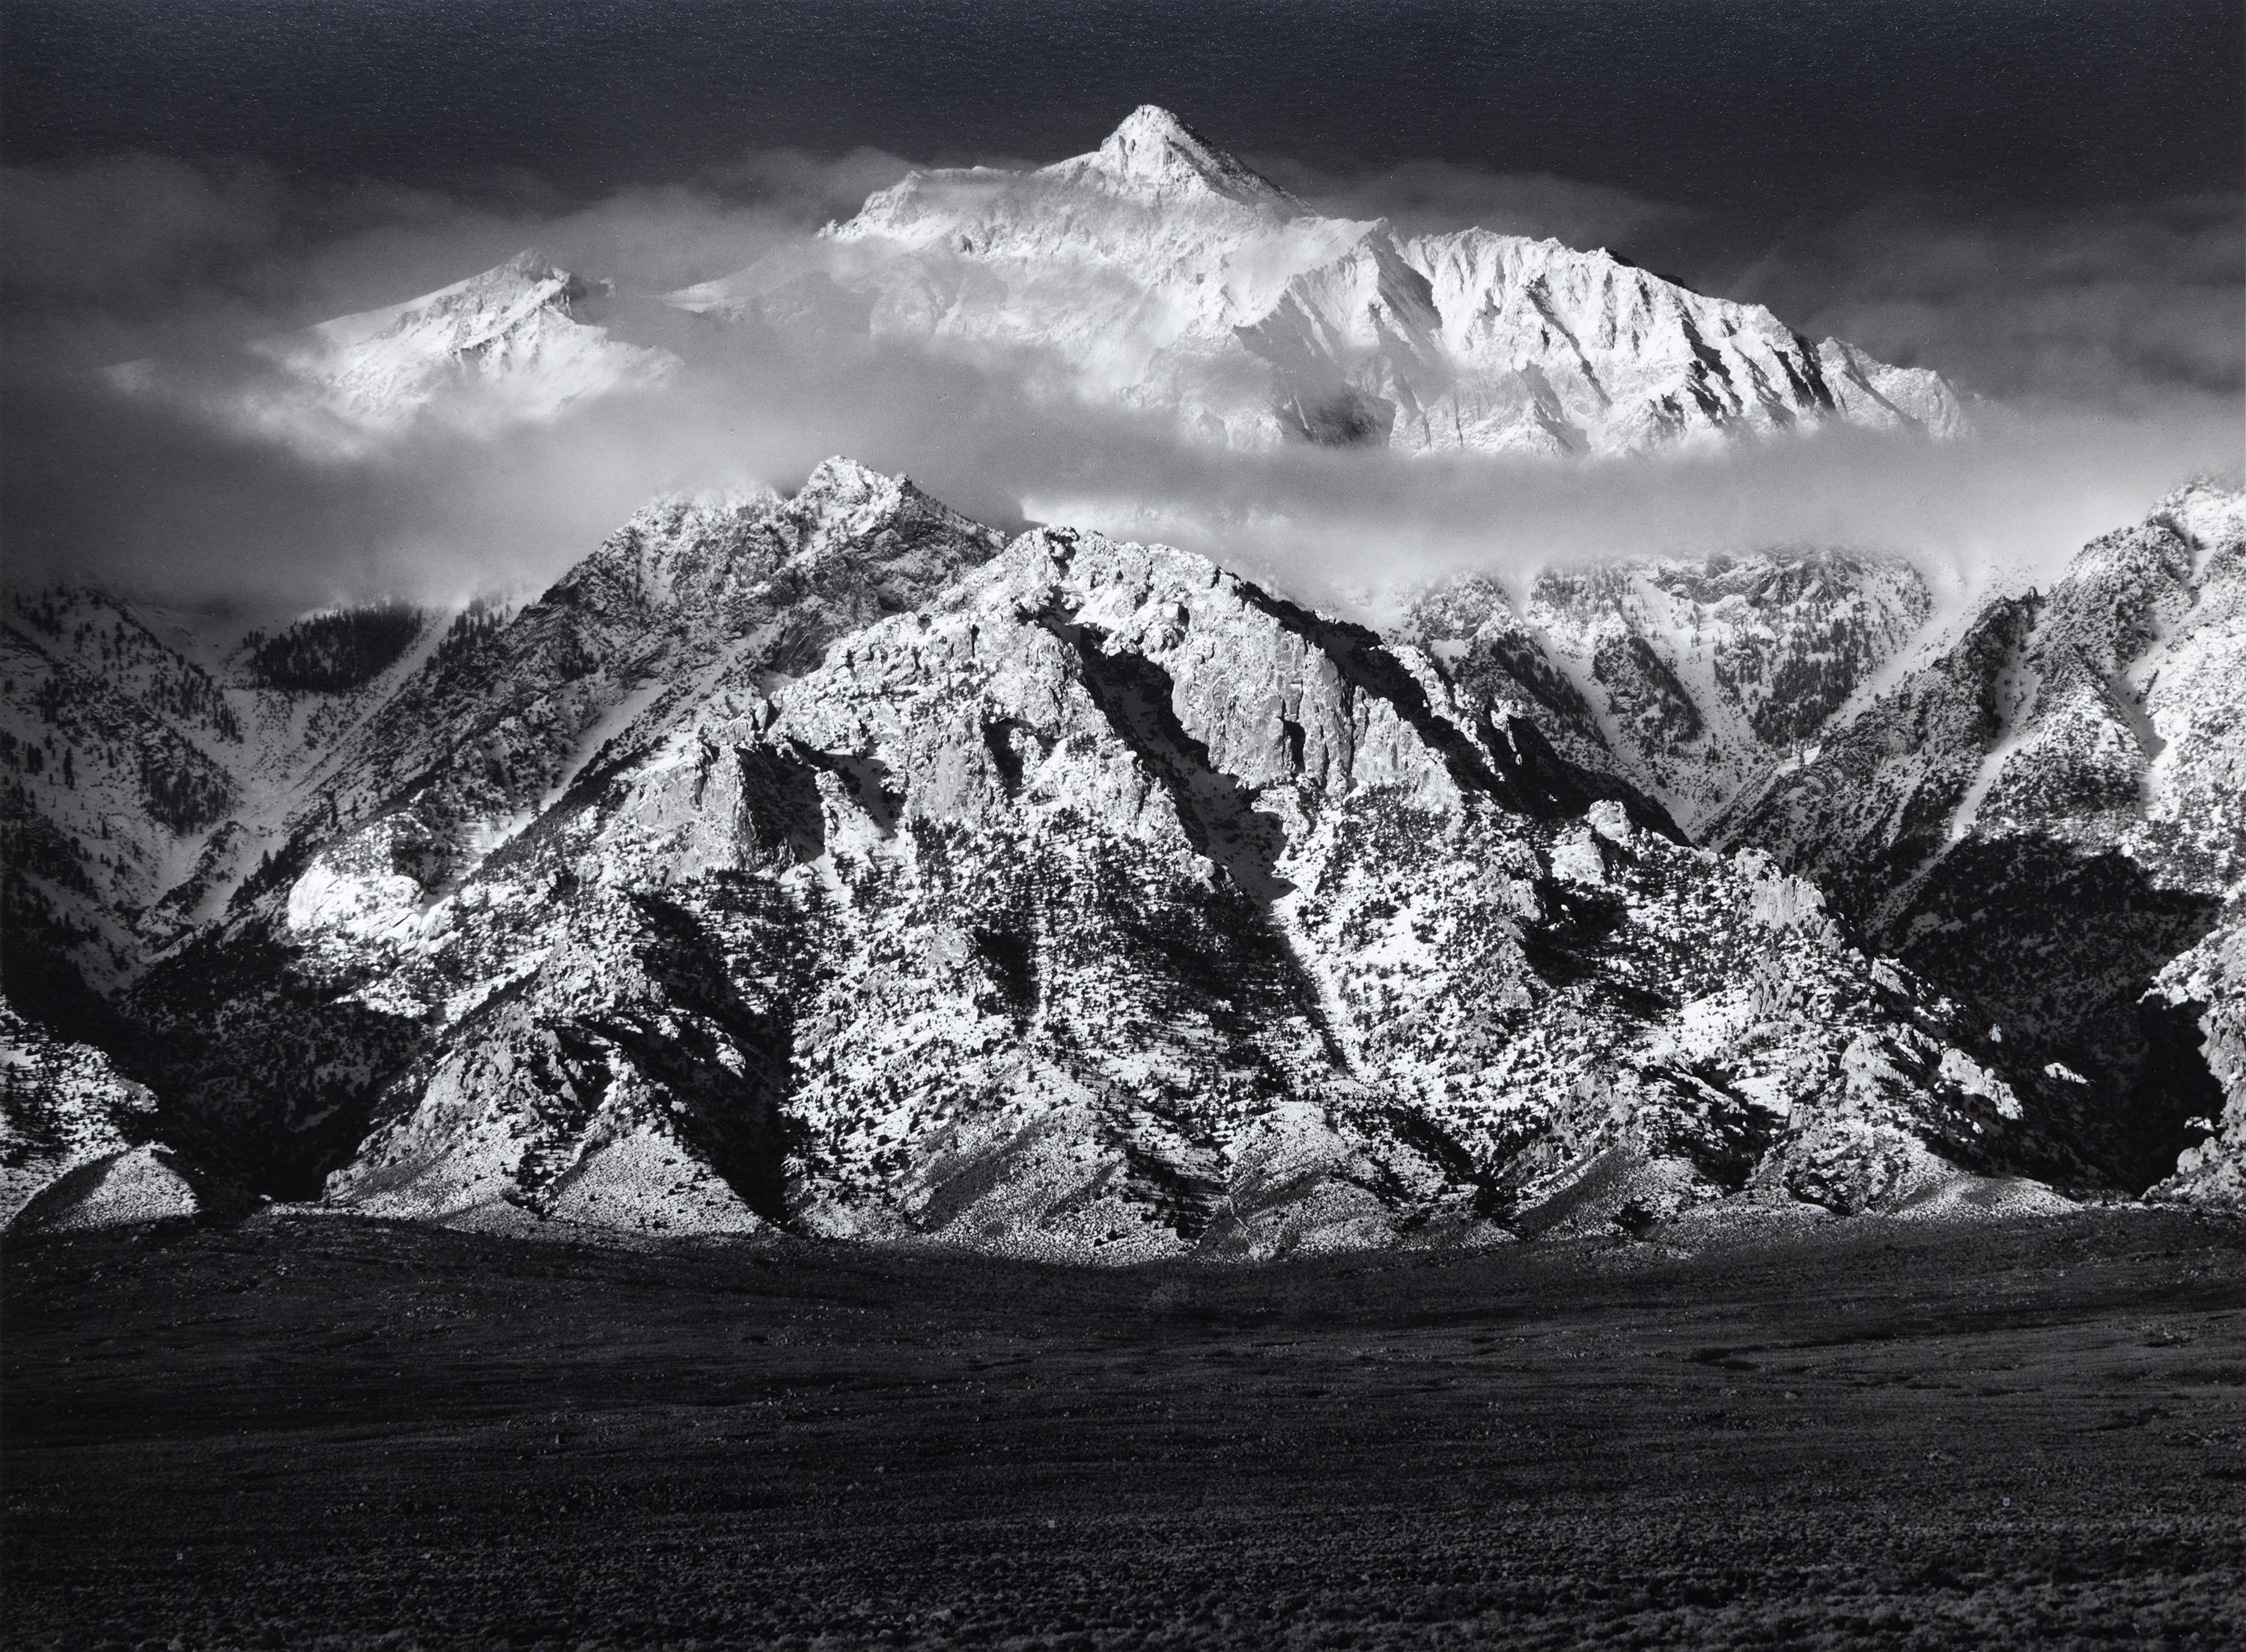 Ansel Adams Black and White Photograph - Mount Williamson, Sierra Nevada from Owens Valley, California